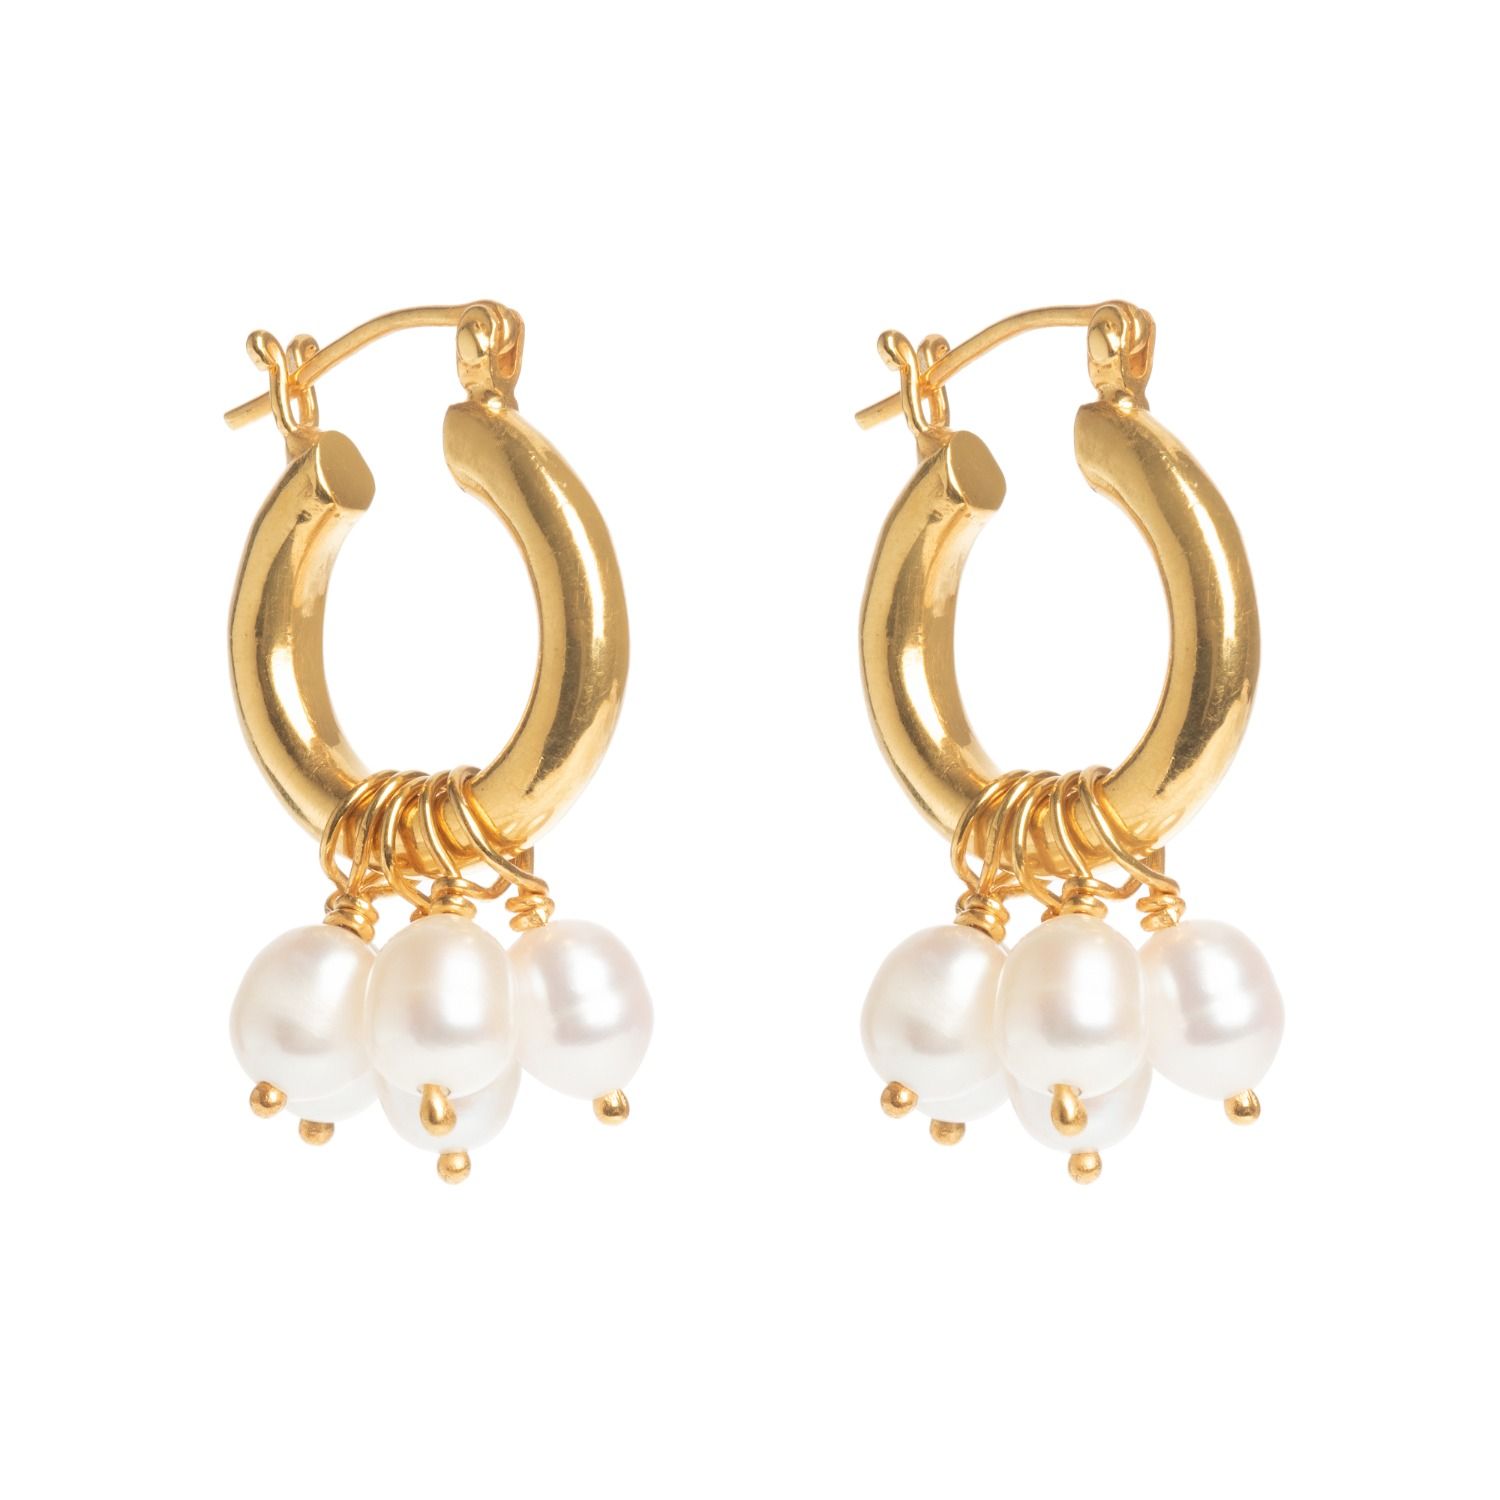 Gold Mini Hoops With Detachable Pearls | Wolf and Badger (Global excl. US)